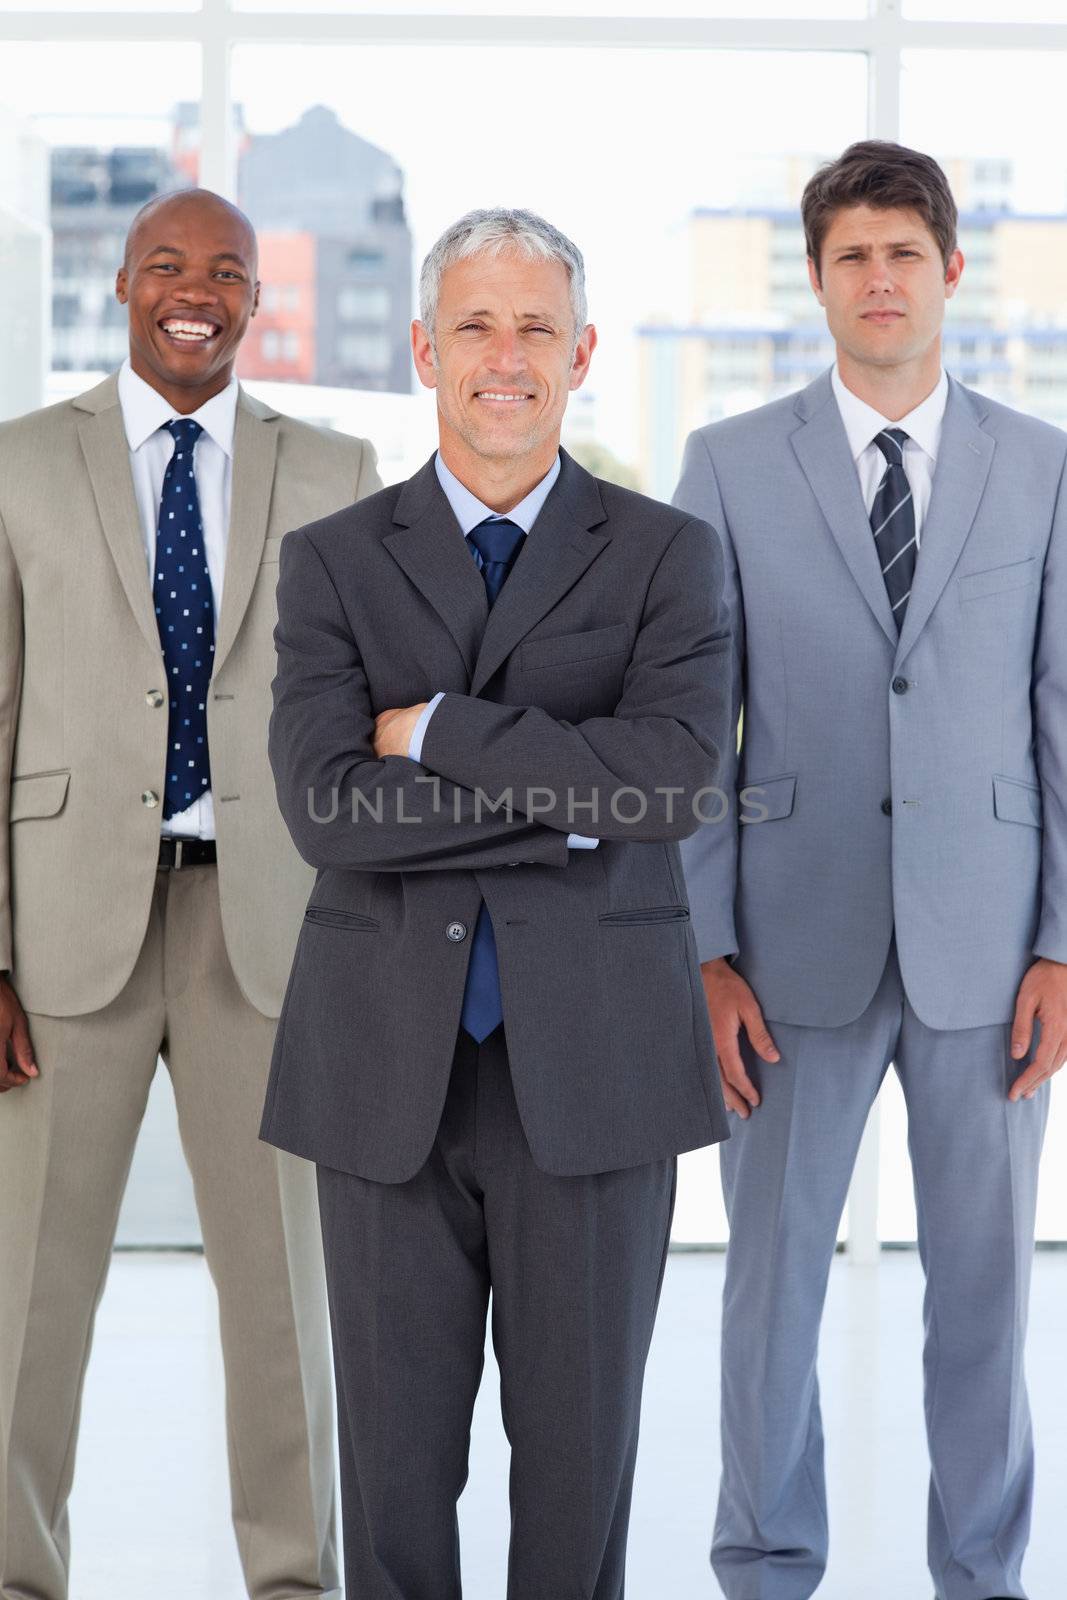 Smiling director standing in front of a relaxed executive and a serious employee